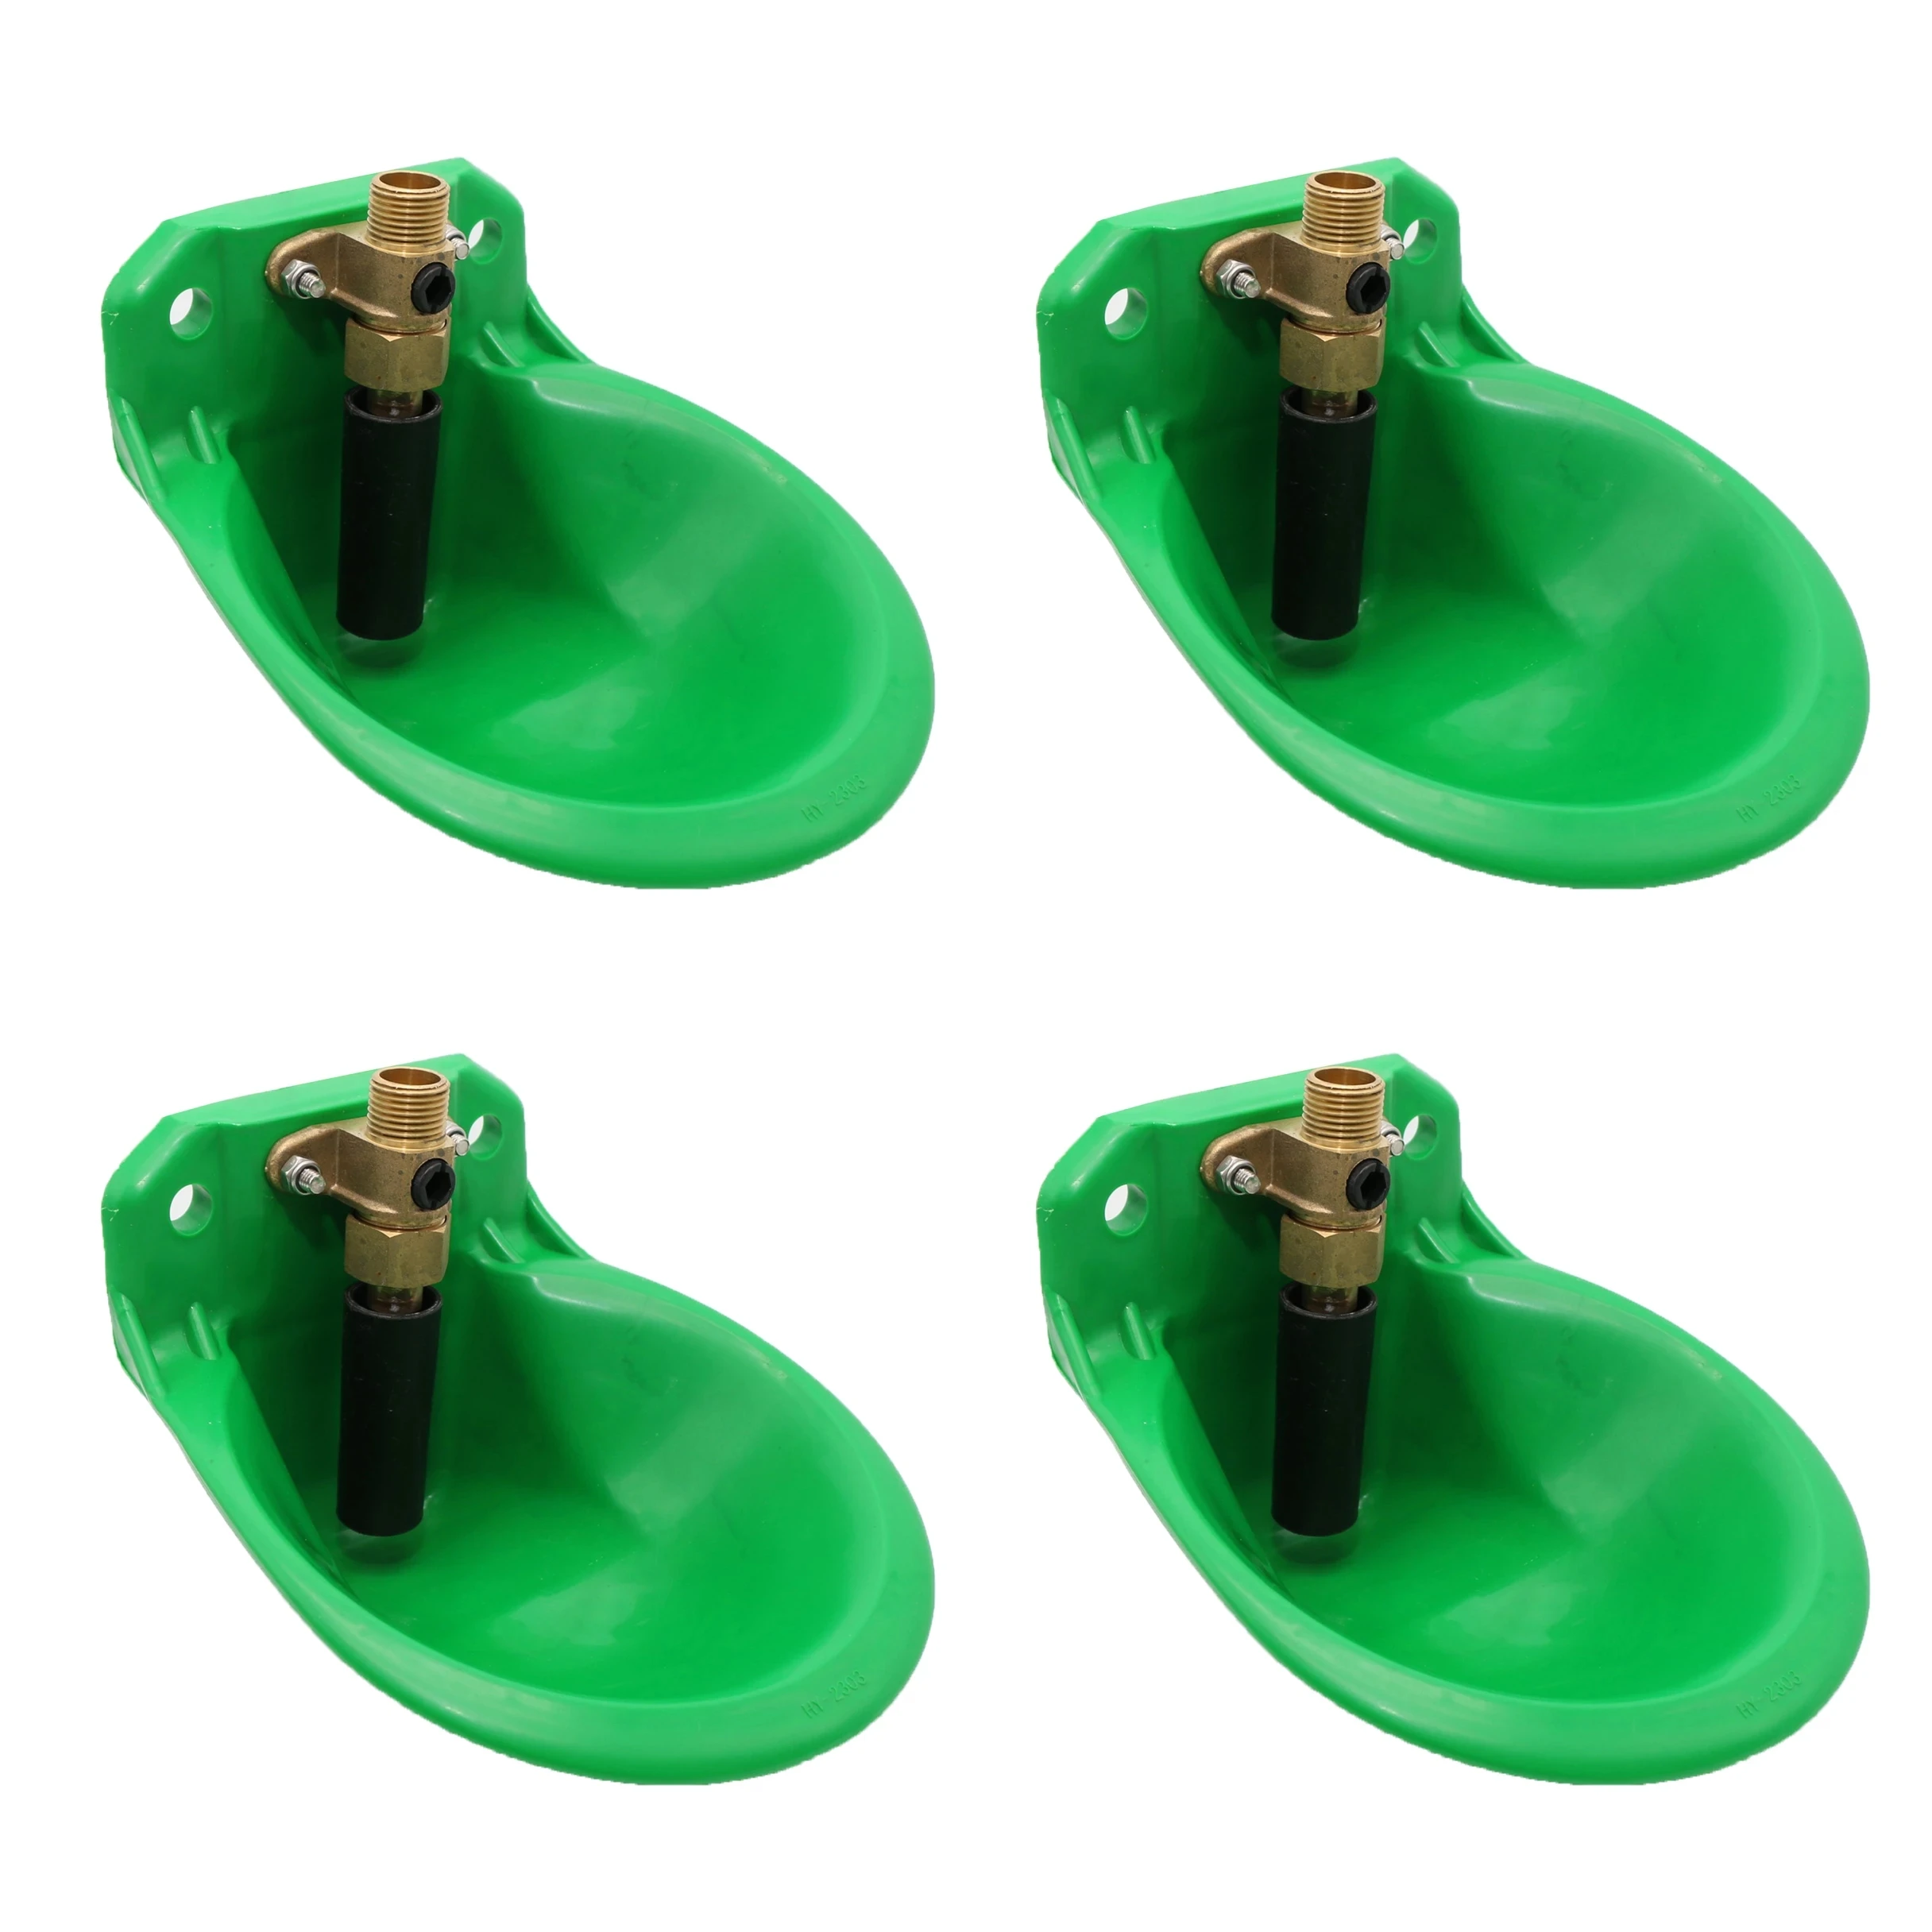 4-pcs-automatic-copper-valve-cow-drinking-trough-sheep-water-bowls-animal-pig-drinking-water-tool-farm-equipment